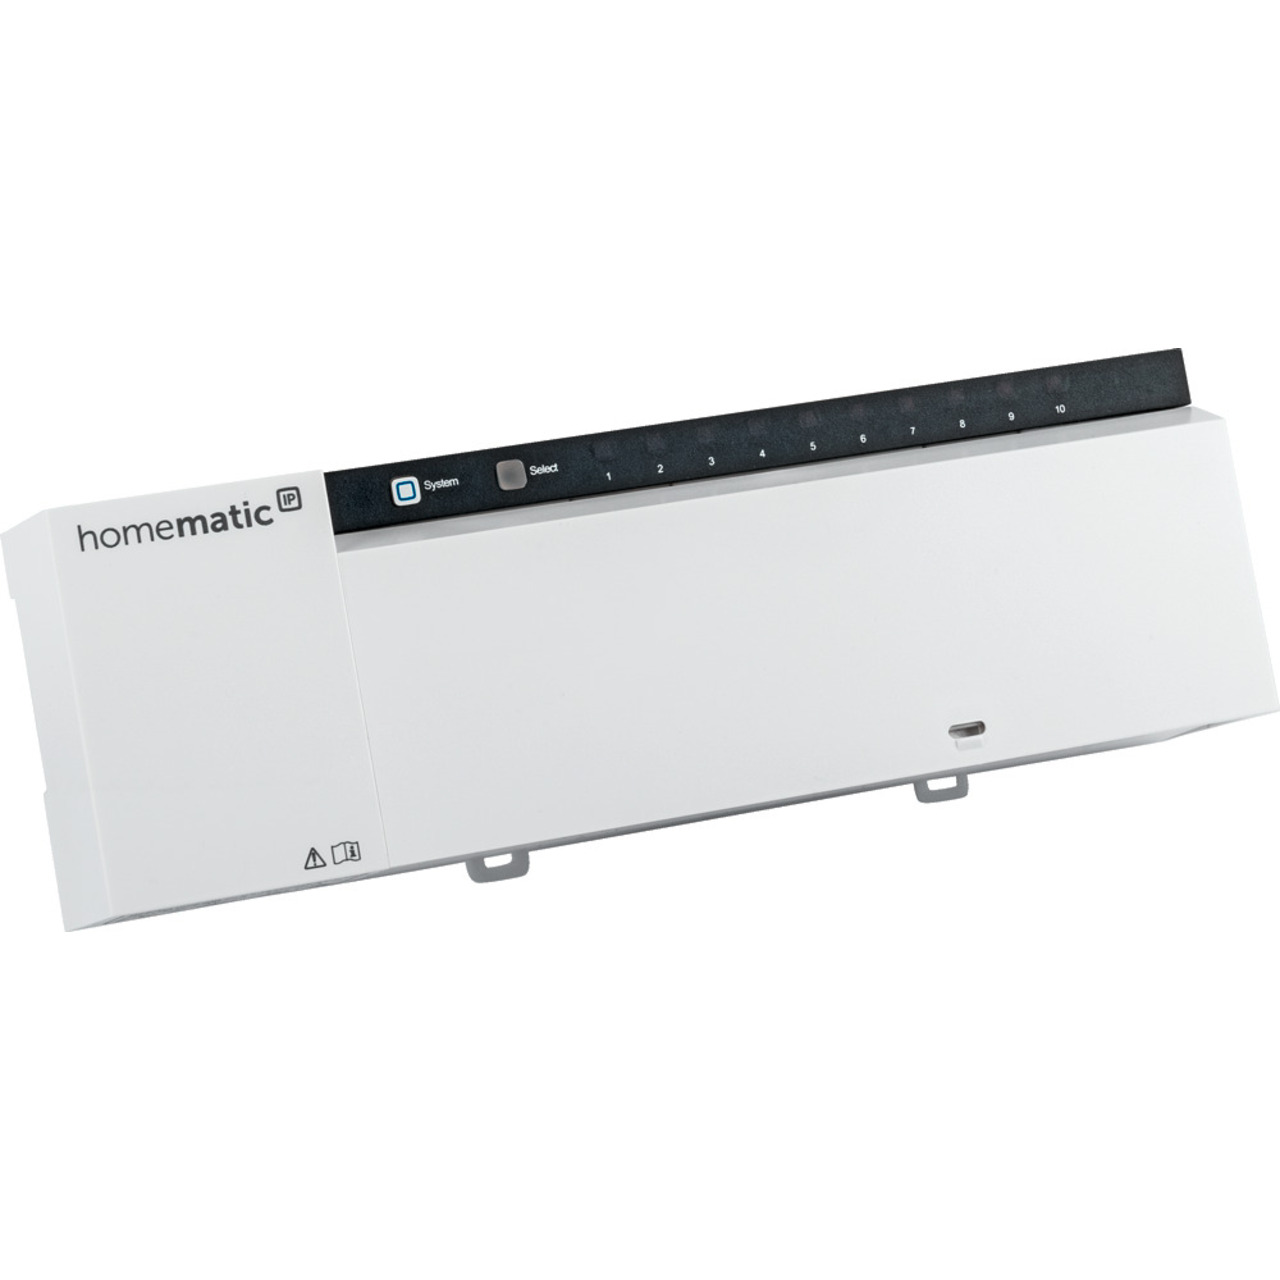 Homematic IP Wired Smart Home Fussbodenheizungscontroller HmIPW-FAL24-C10  10-fach- 24 V unter Hausautomation